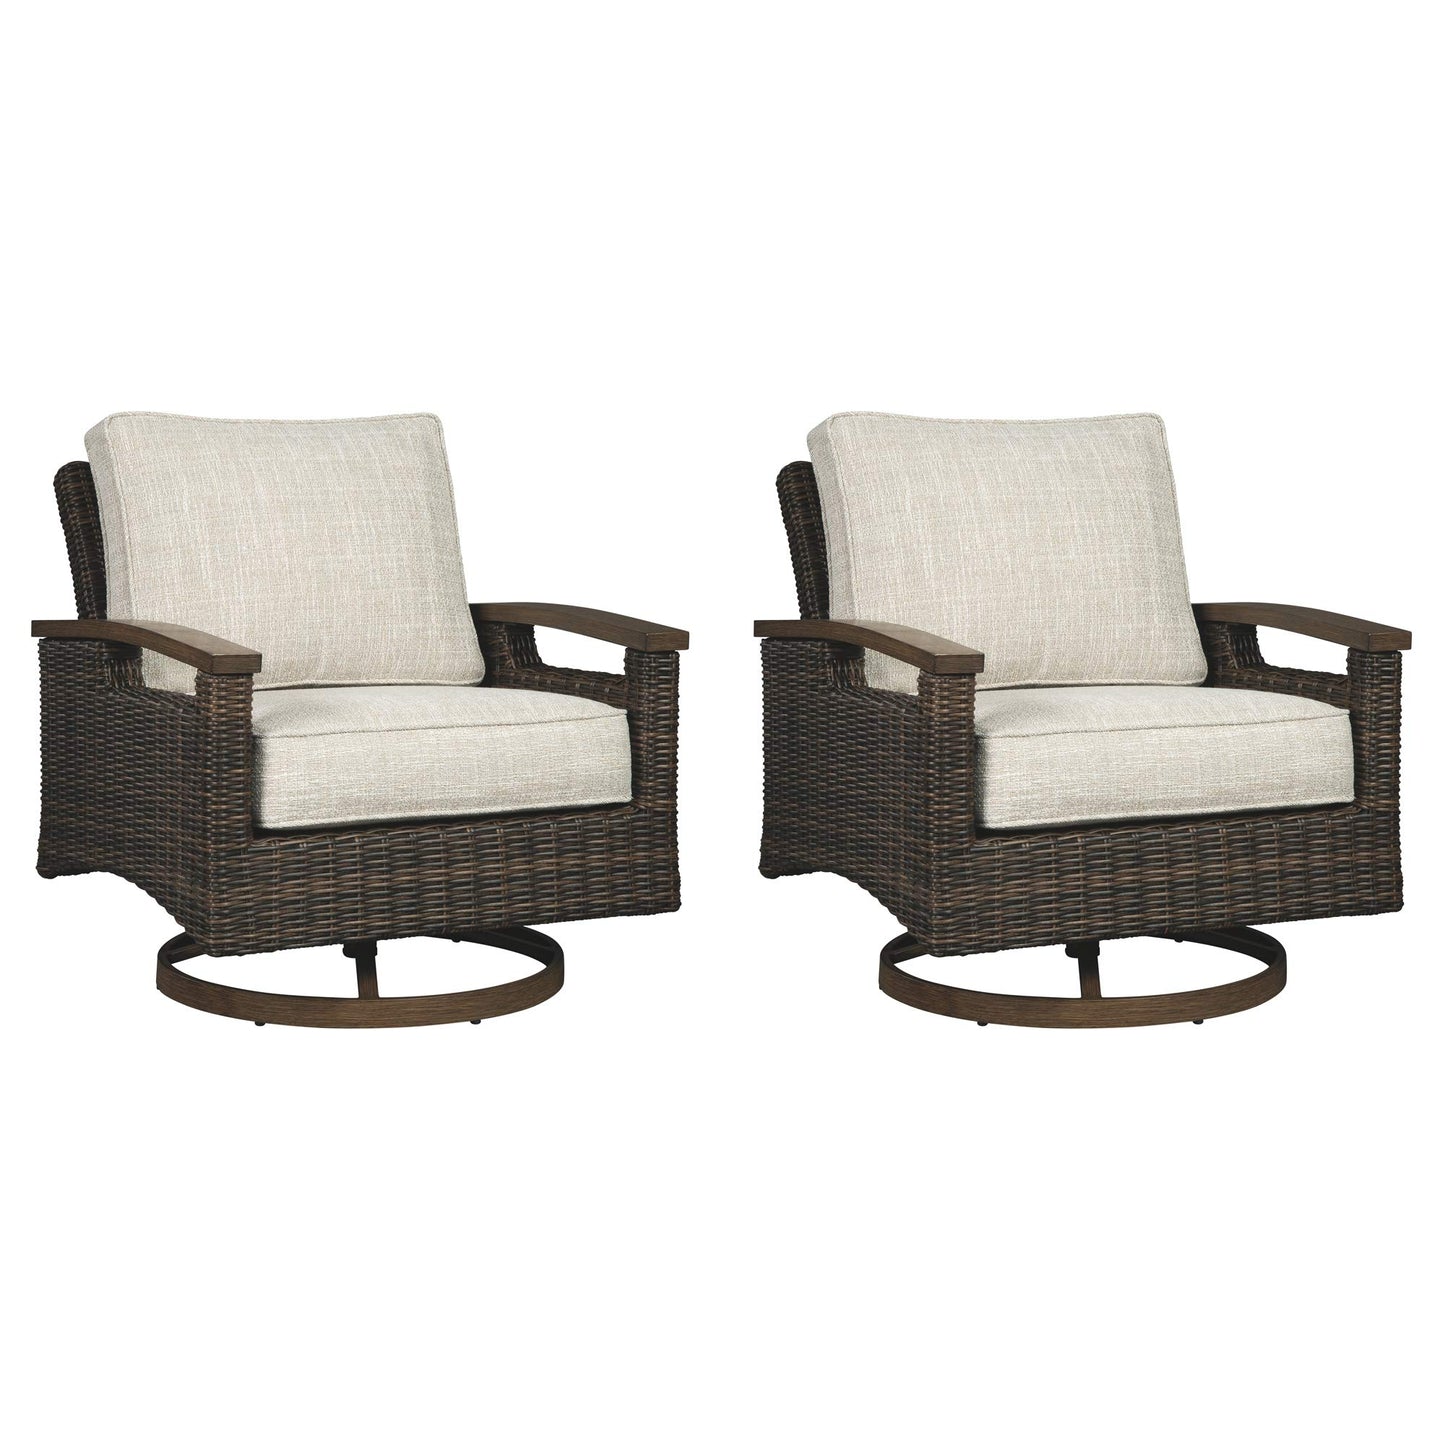 Signature Design Ashley Paradise Trail Outdoor Swivel Lounge Chairs, Beige